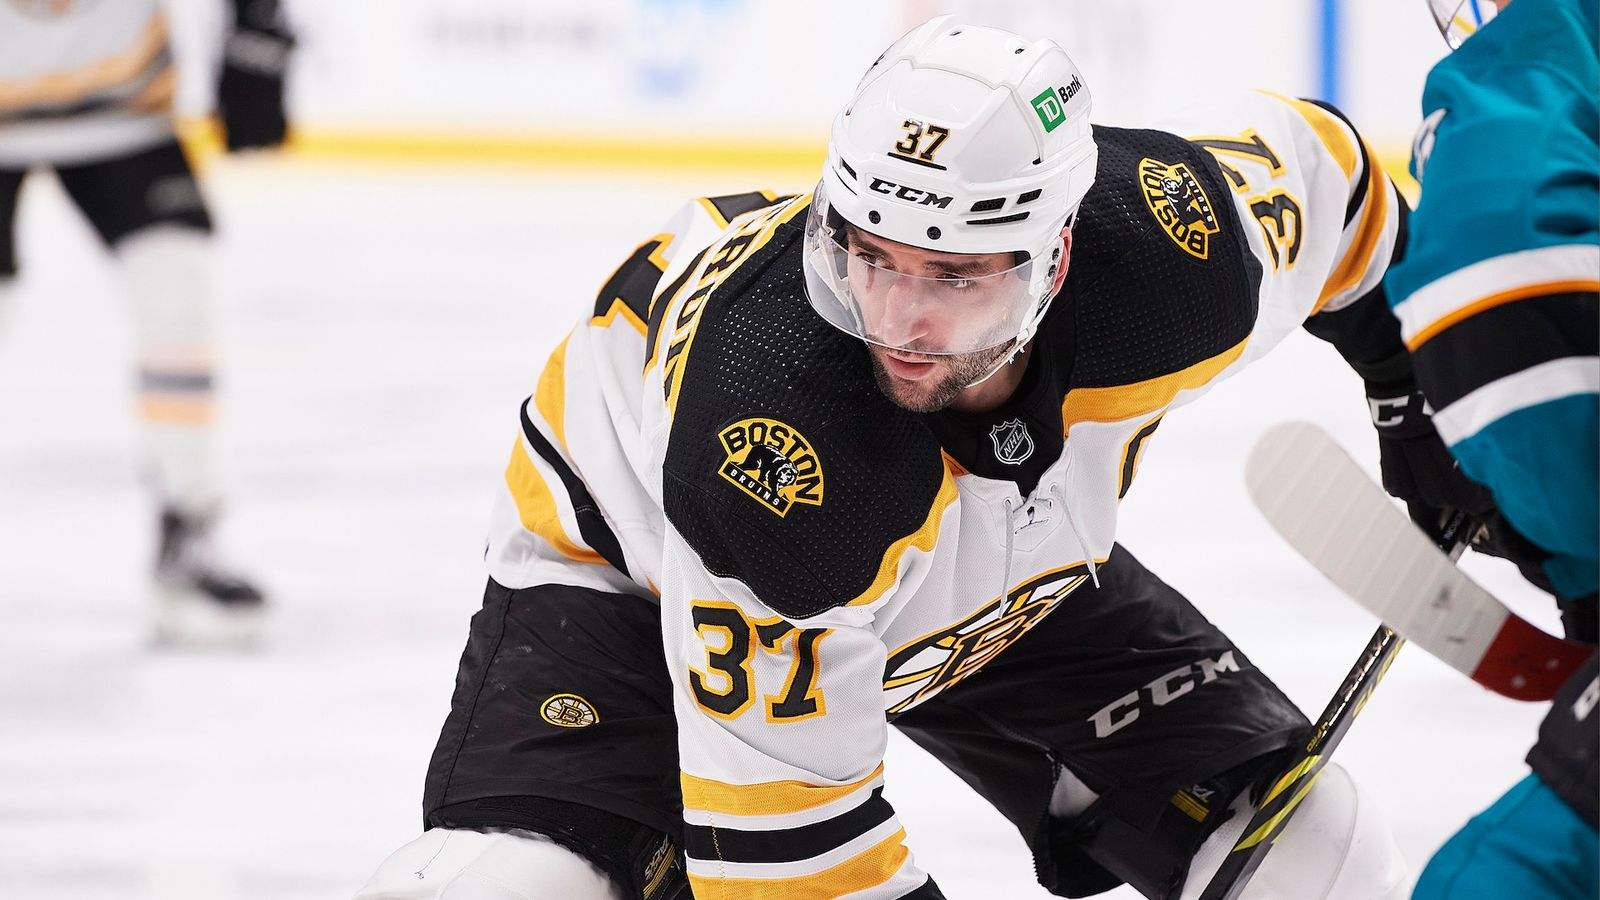 Patrice Bergeron may get freed up on offense - The Boston Globe